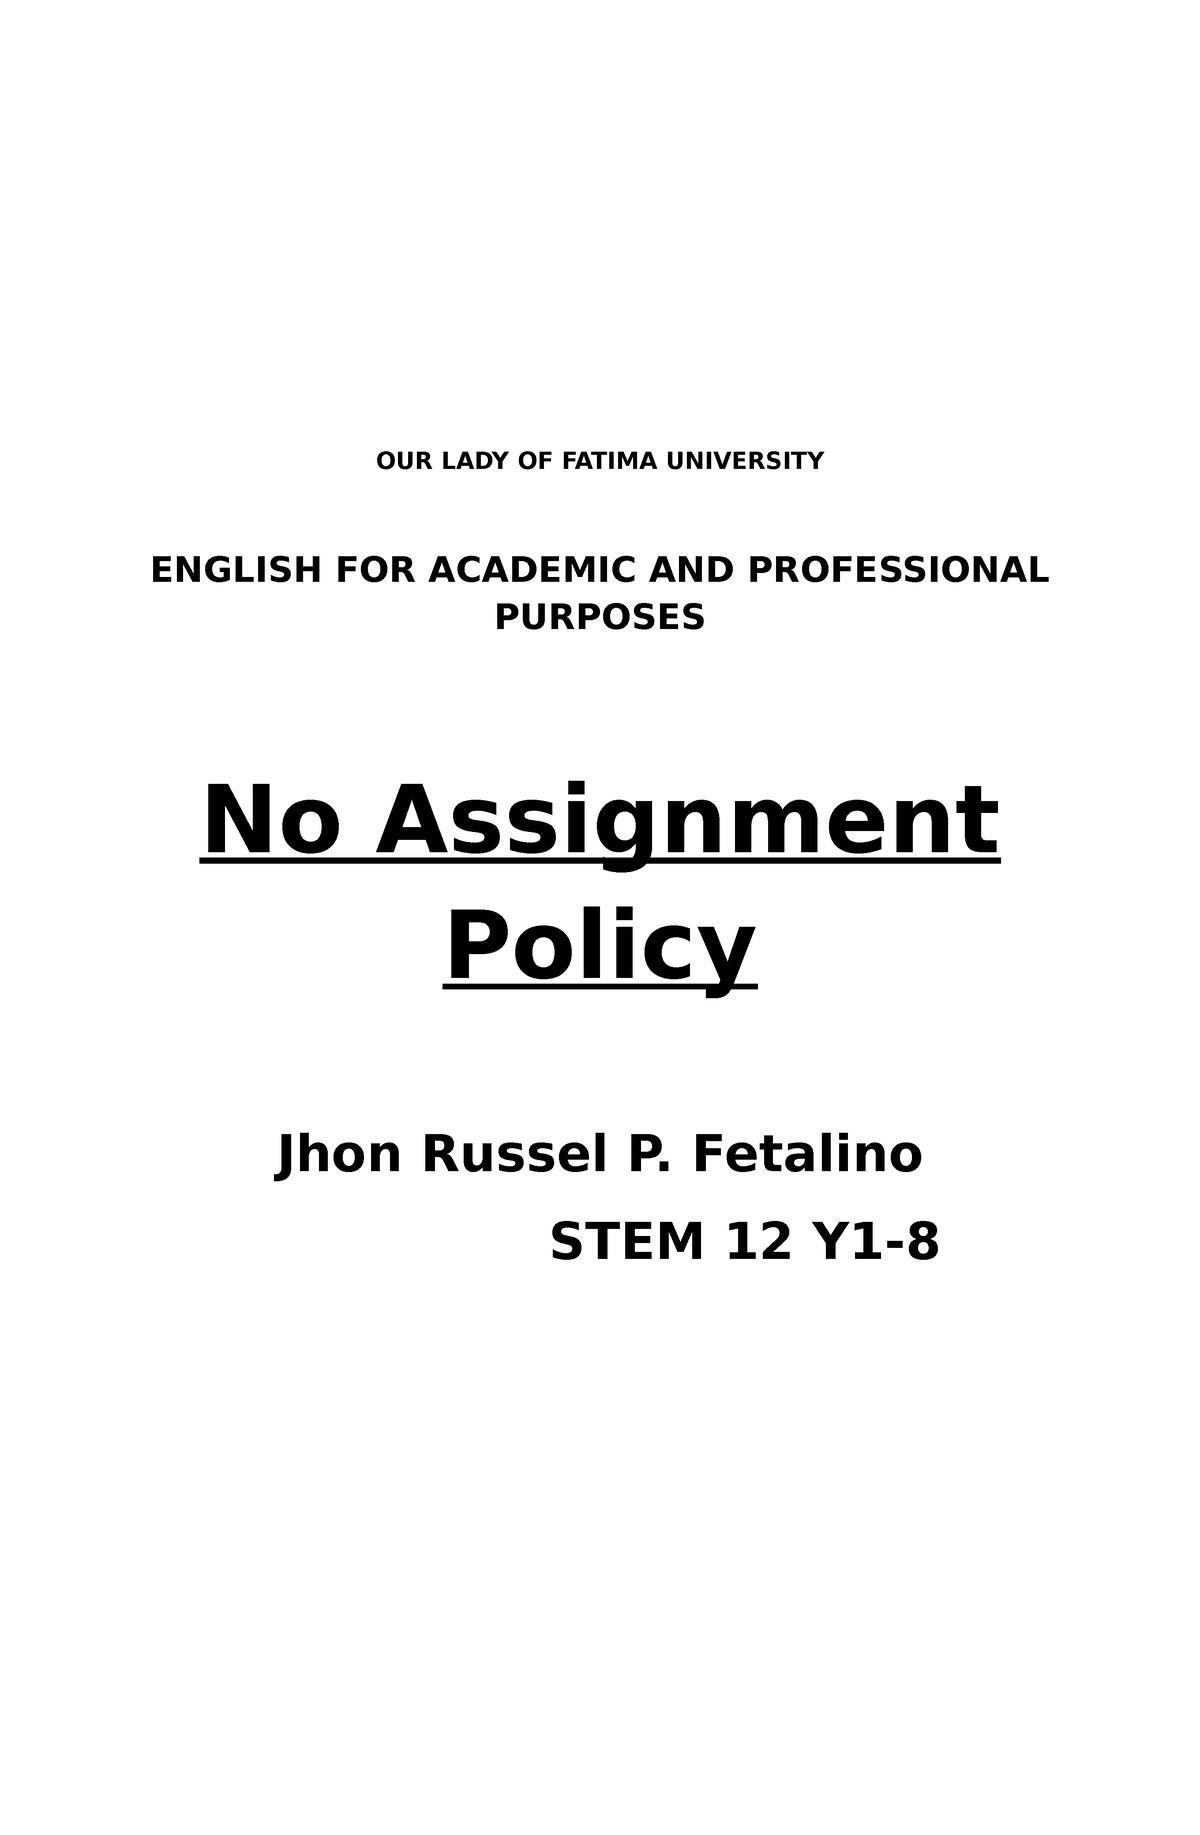 no assignment policy agree